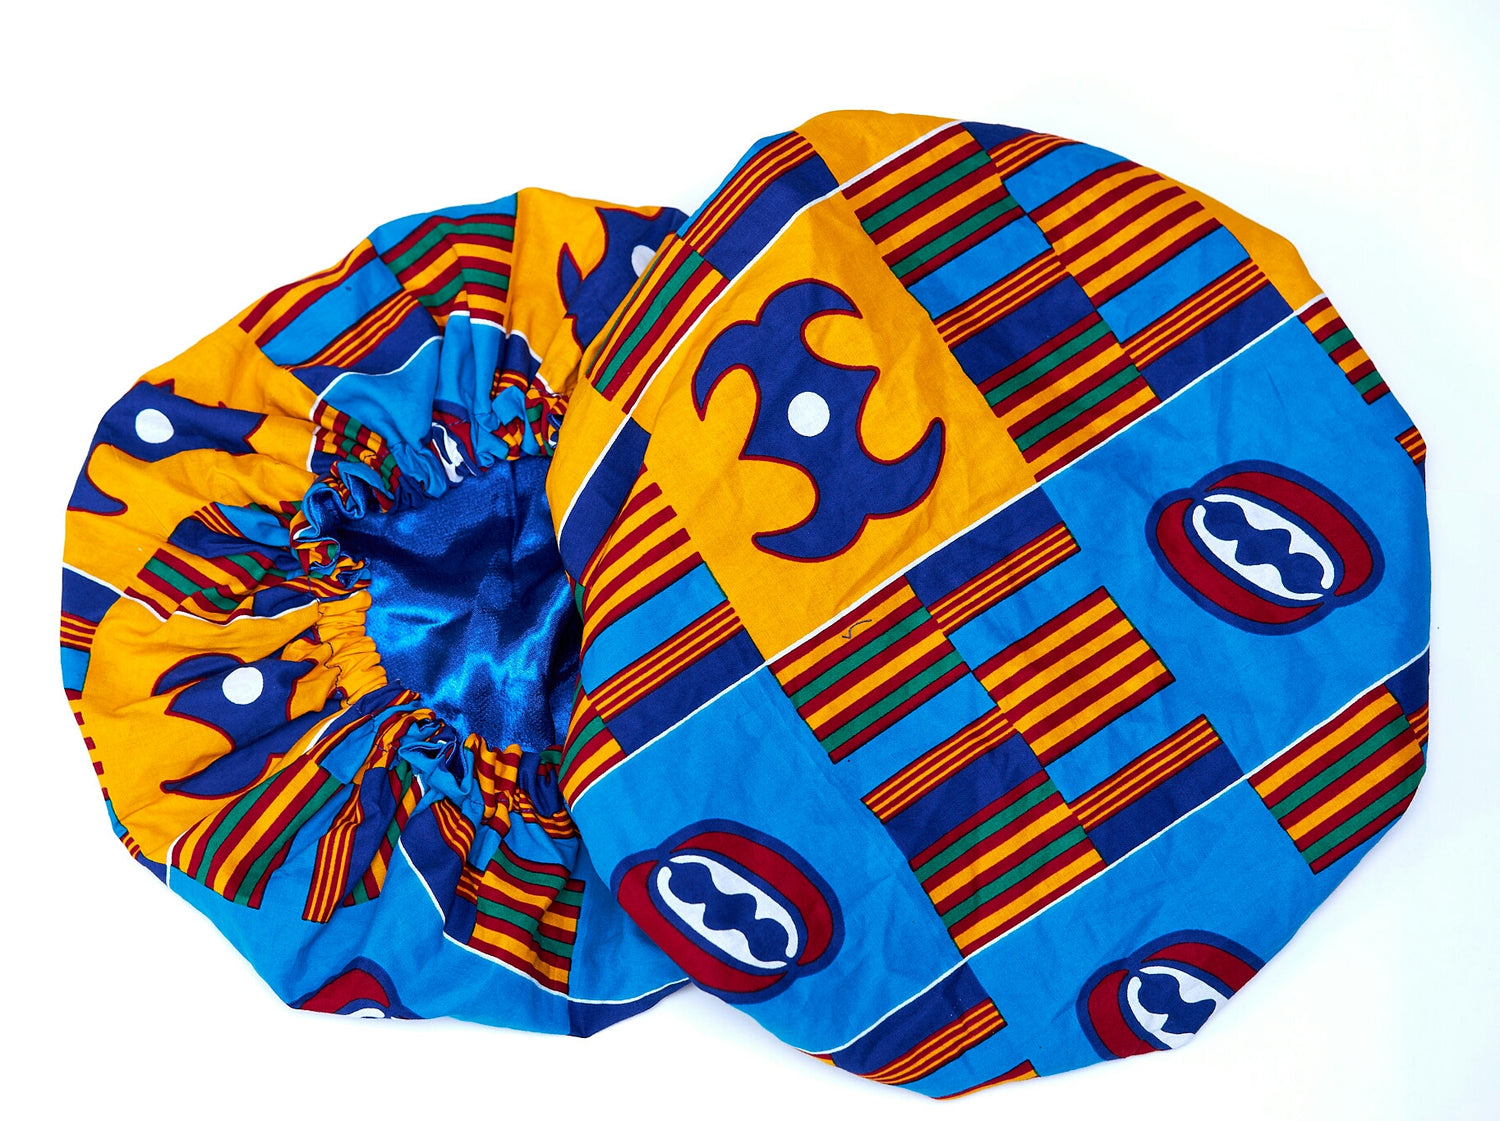 Yellow, Blue, Red , Green And White Mix Pattern Adinkra Symbols Ankara Wax Print With Blue Silk Lined Hair Bonnet